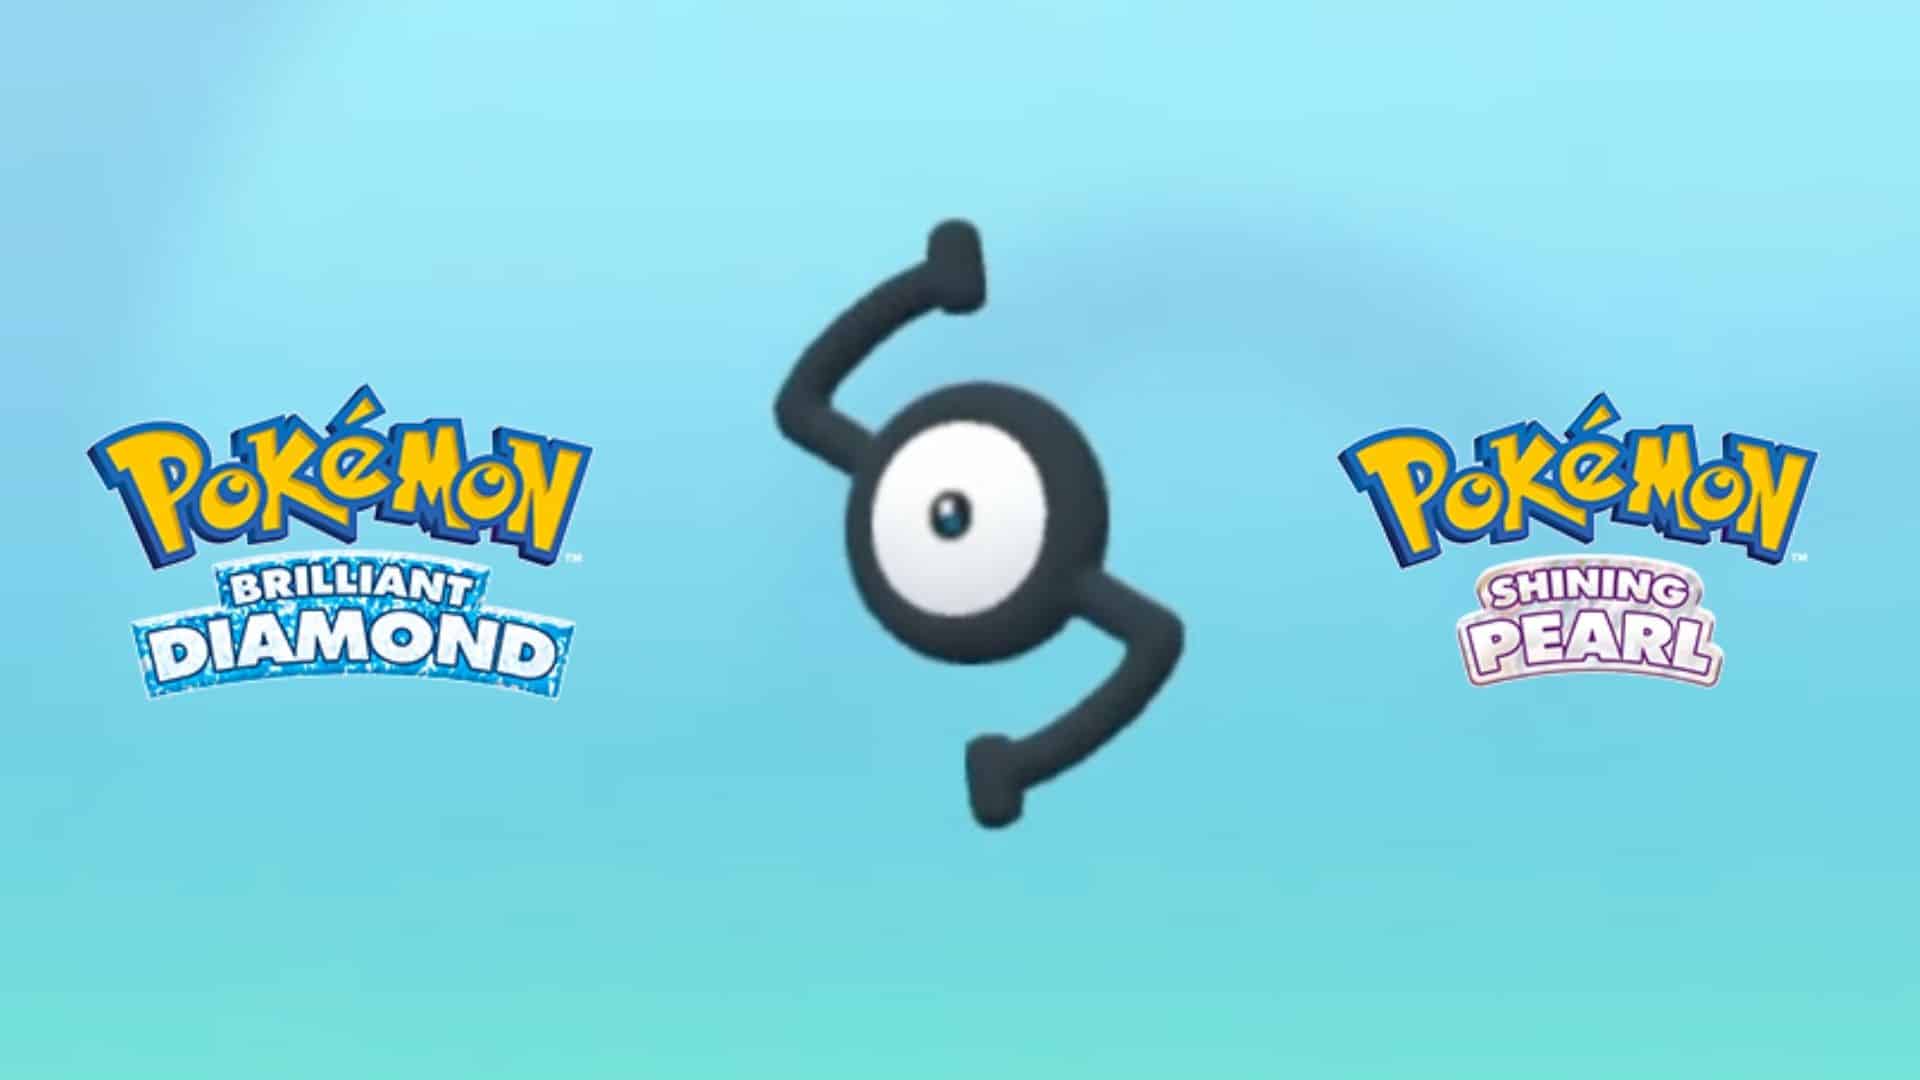 The Unown quest - everything we know about Unown in Pokémon GO